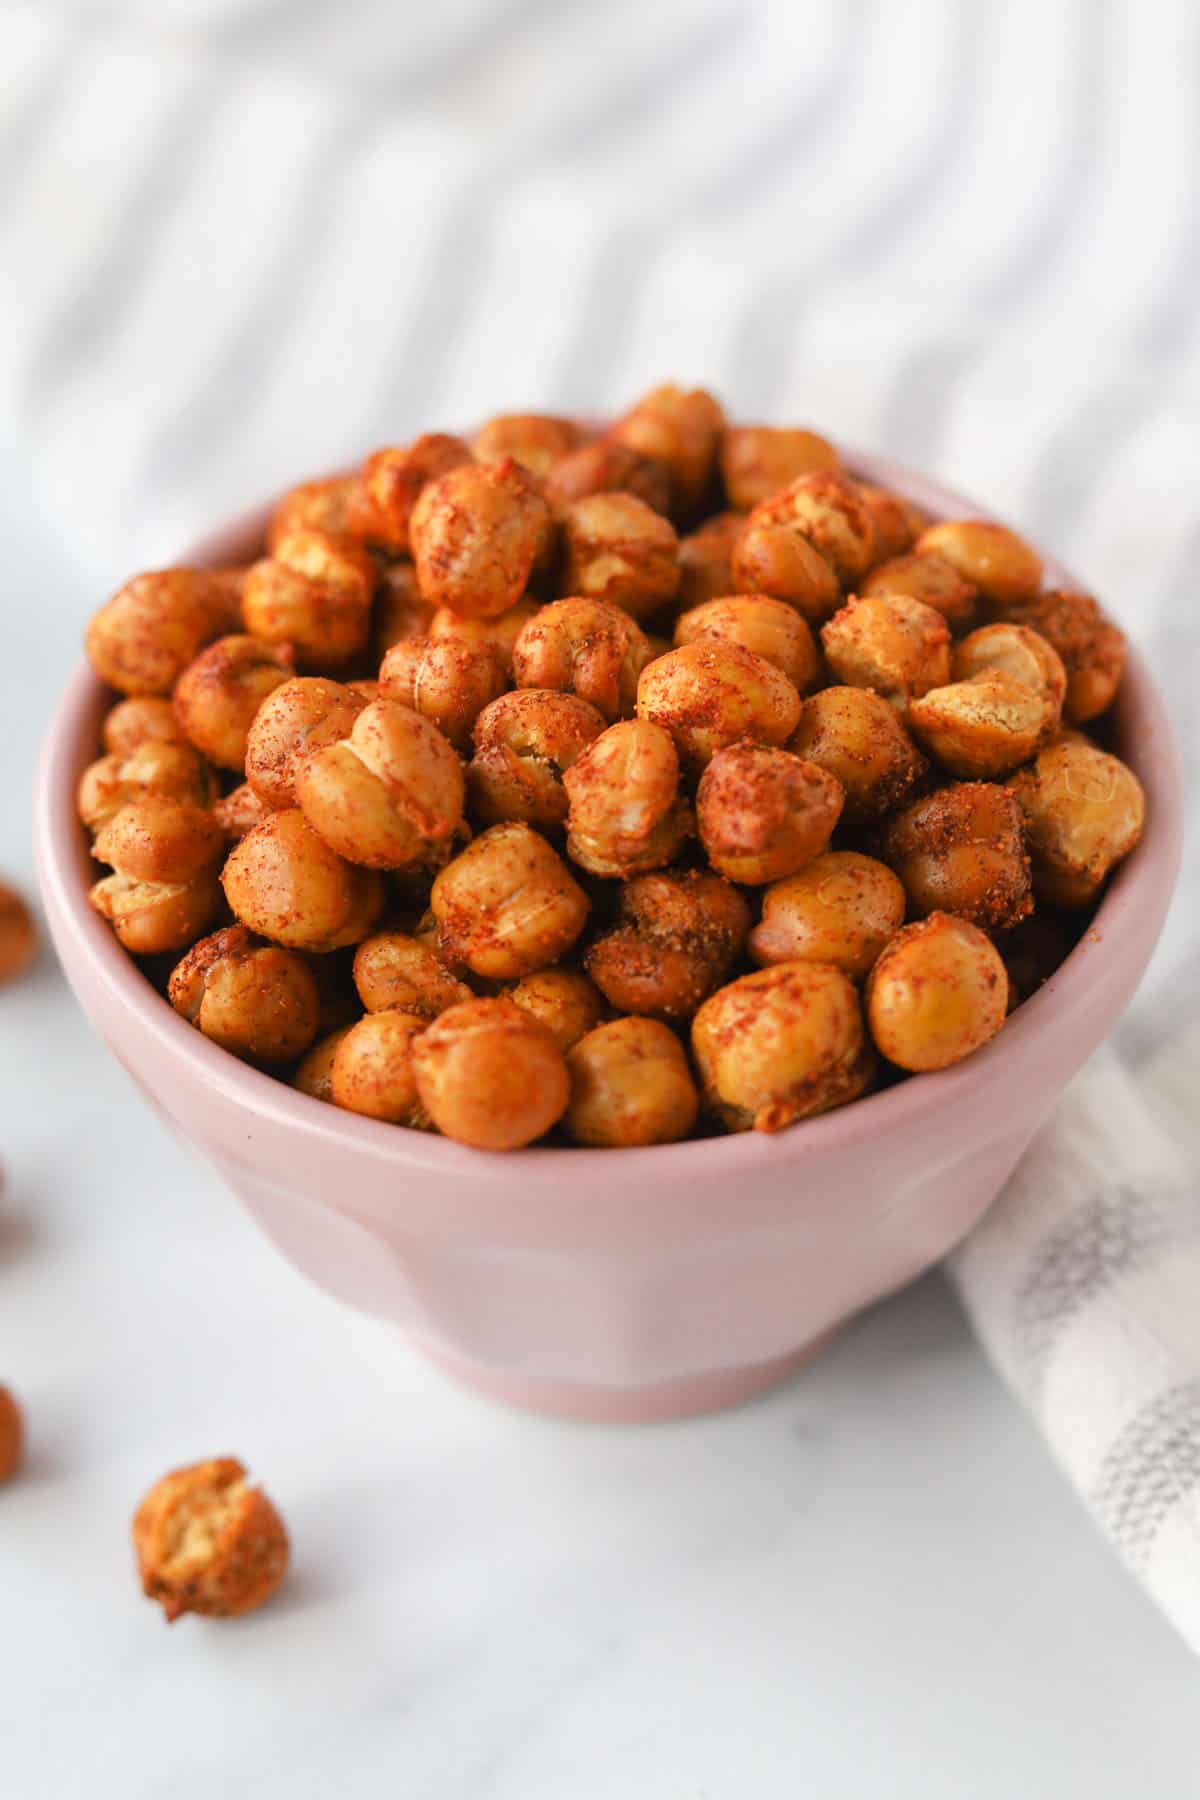 Close up image of roasted chickpeas with seasoning in a bowl.